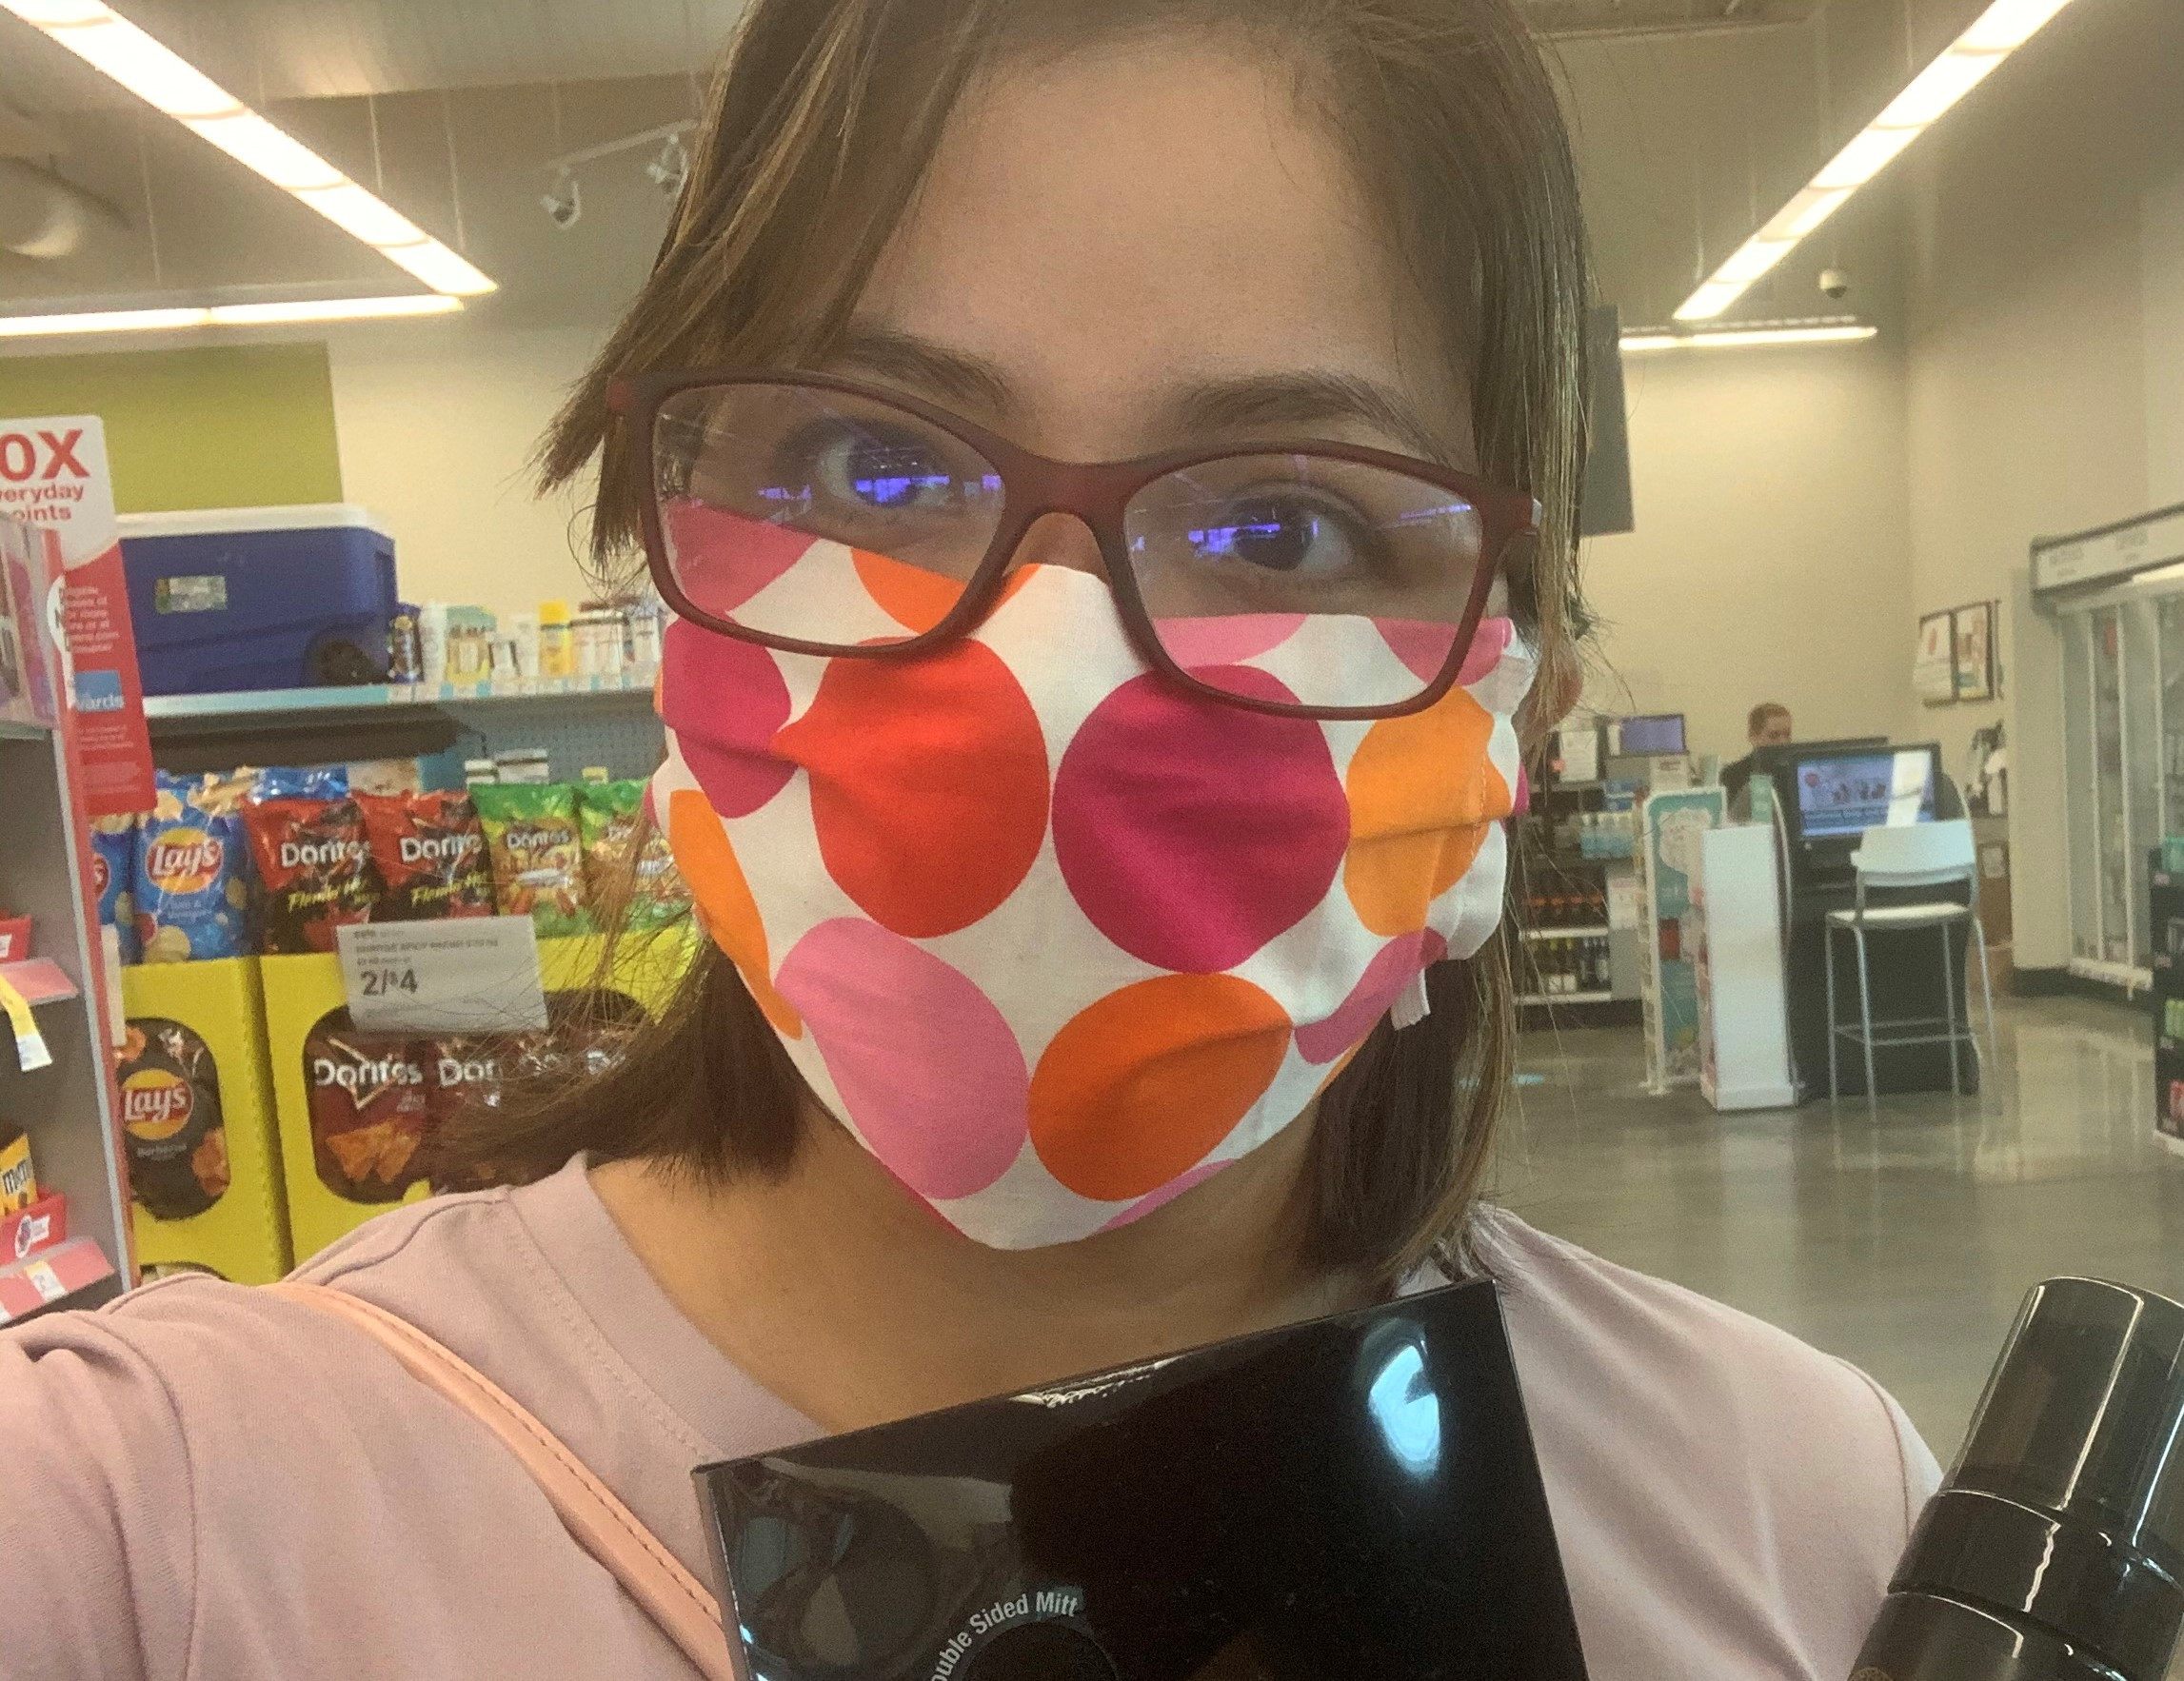 Selfie of a woman with glasses and a mask in a store.